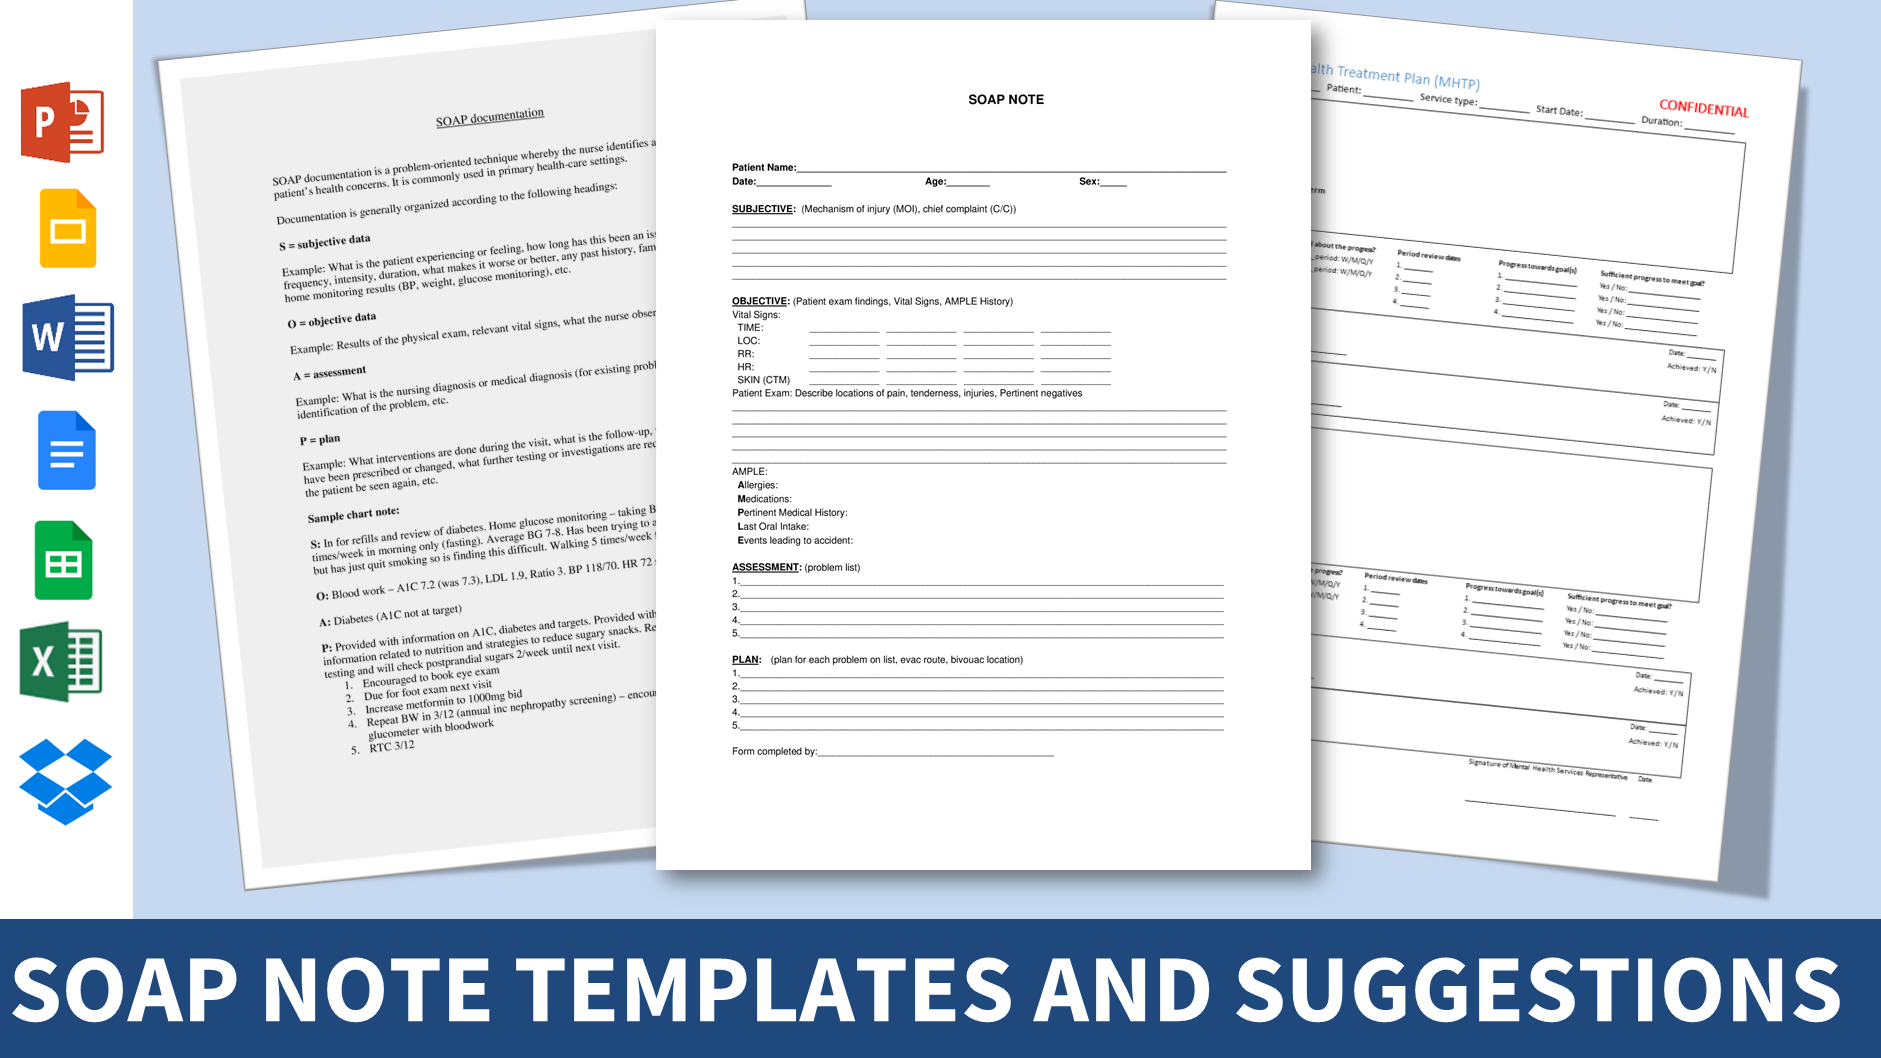 SOAP Note Templates